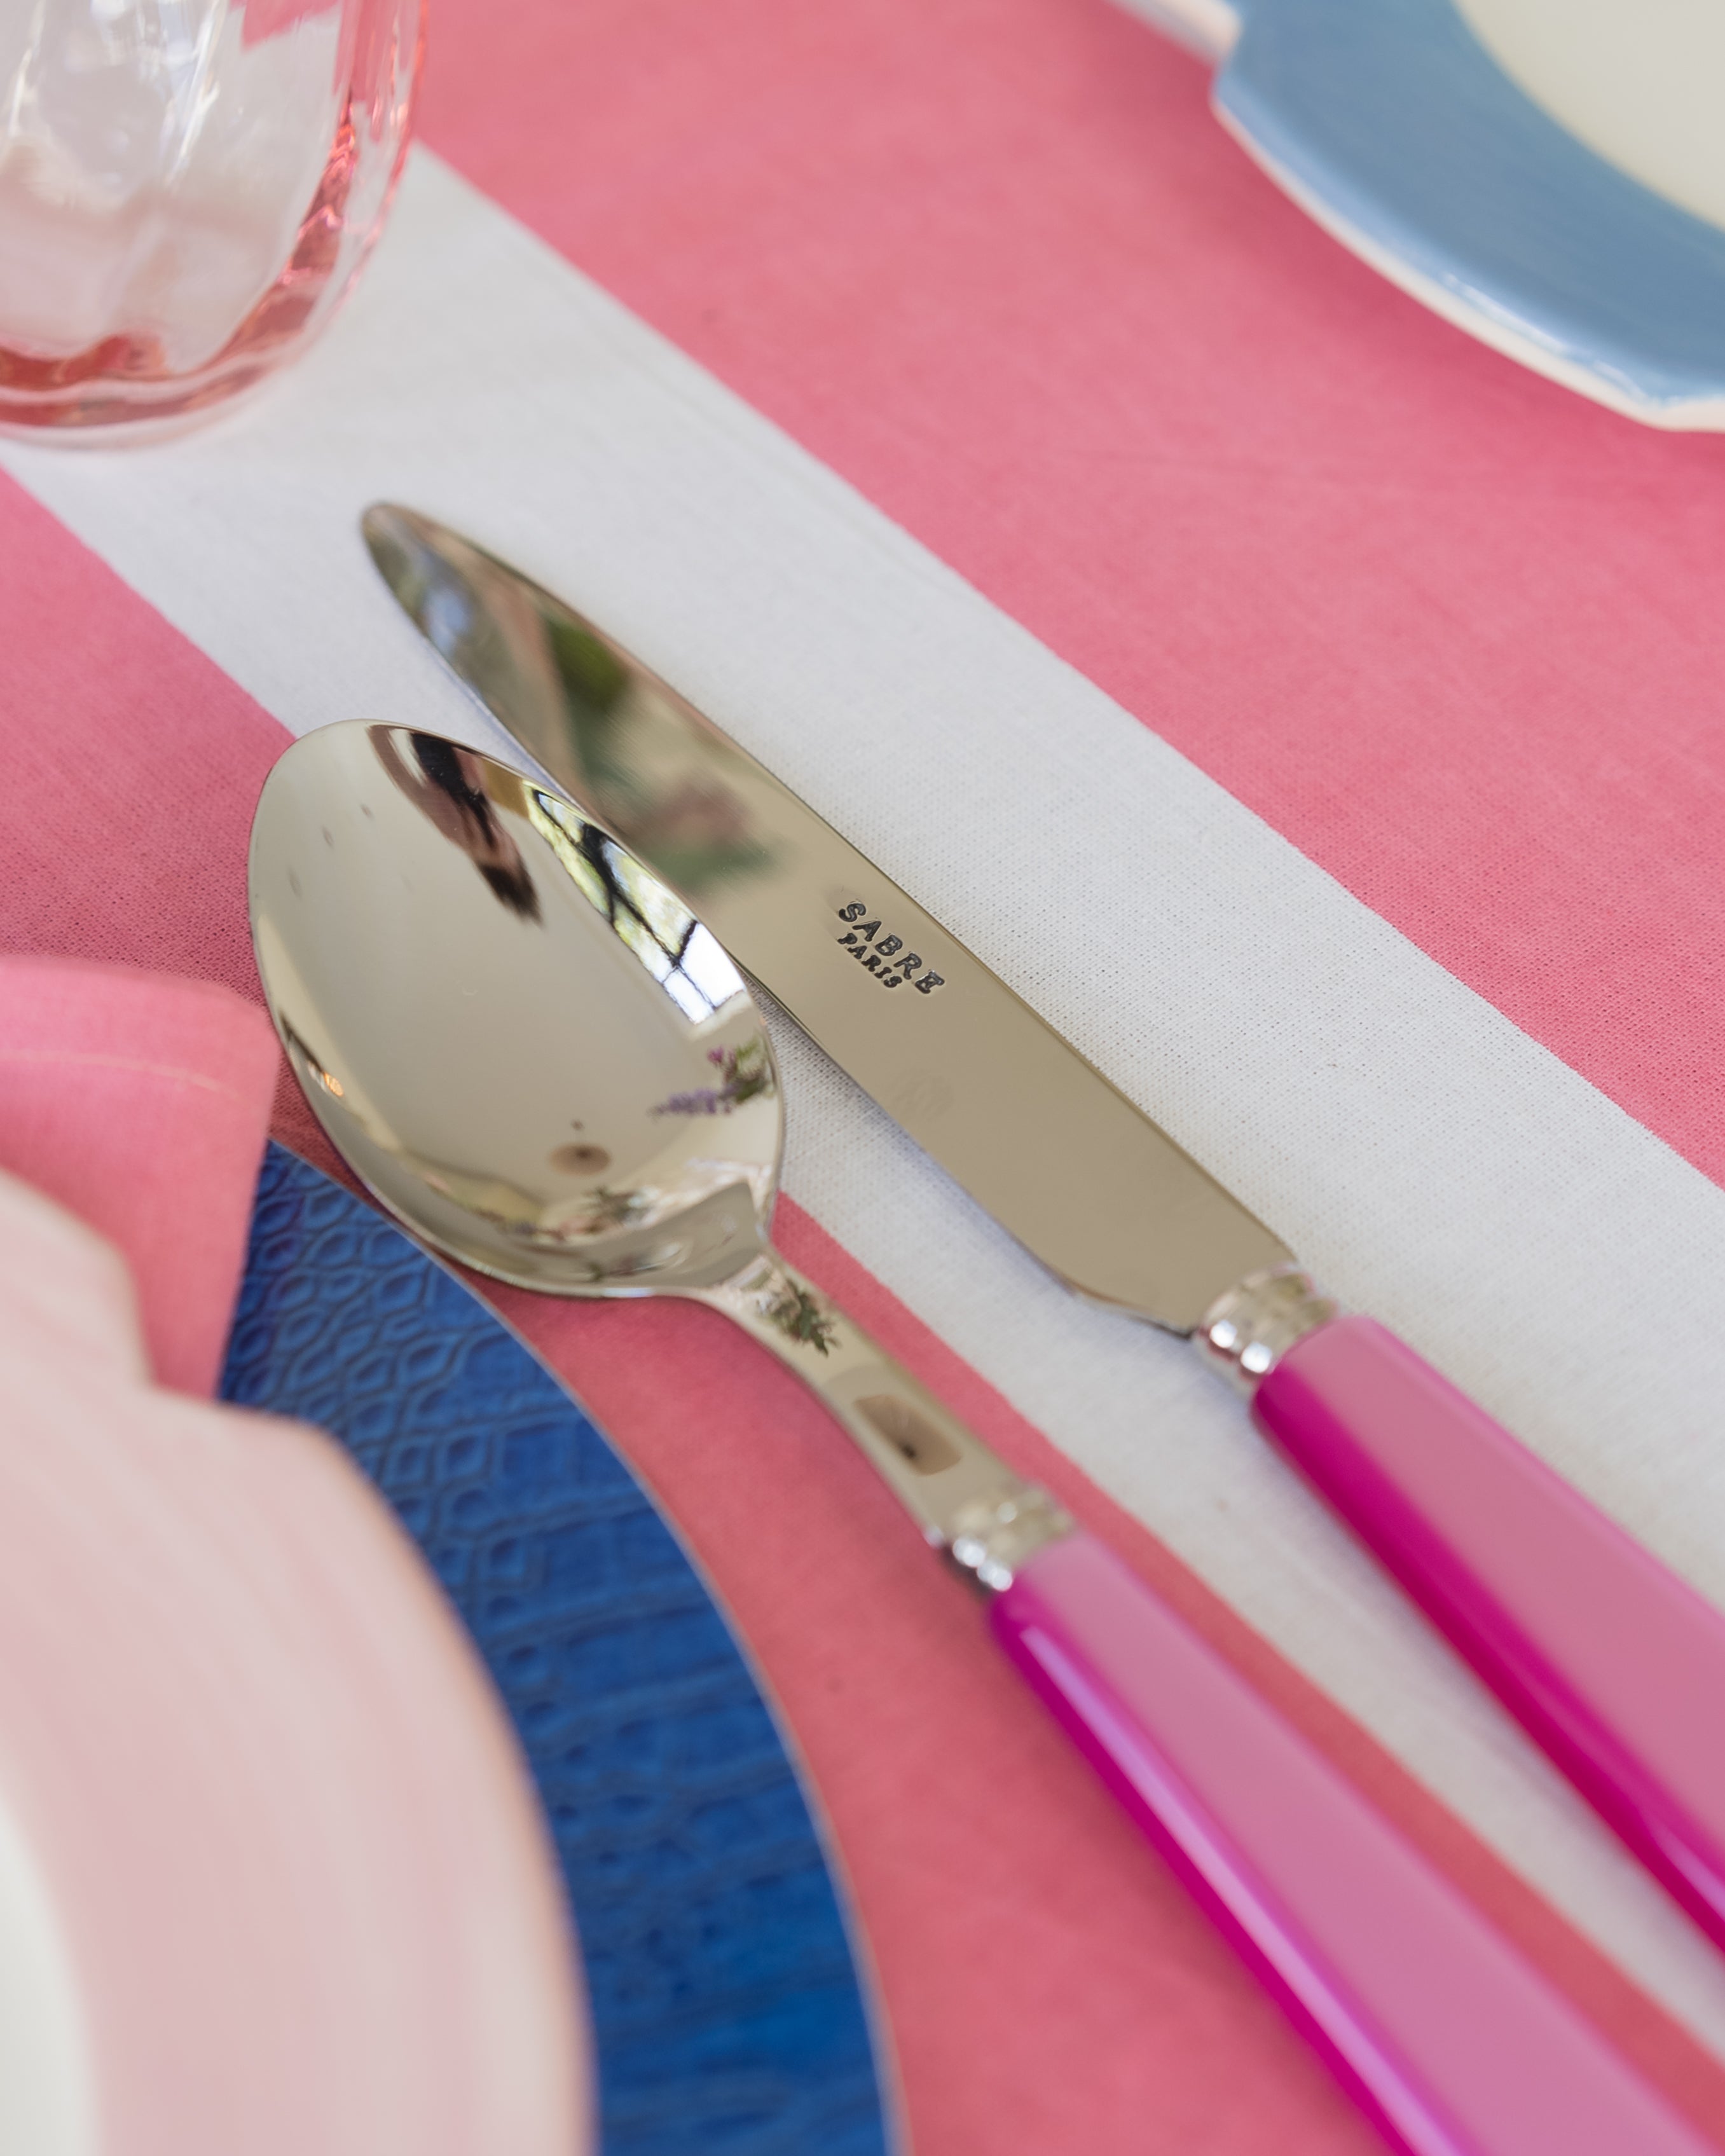 Sabre Icone pink dessert spoon and dinner knife